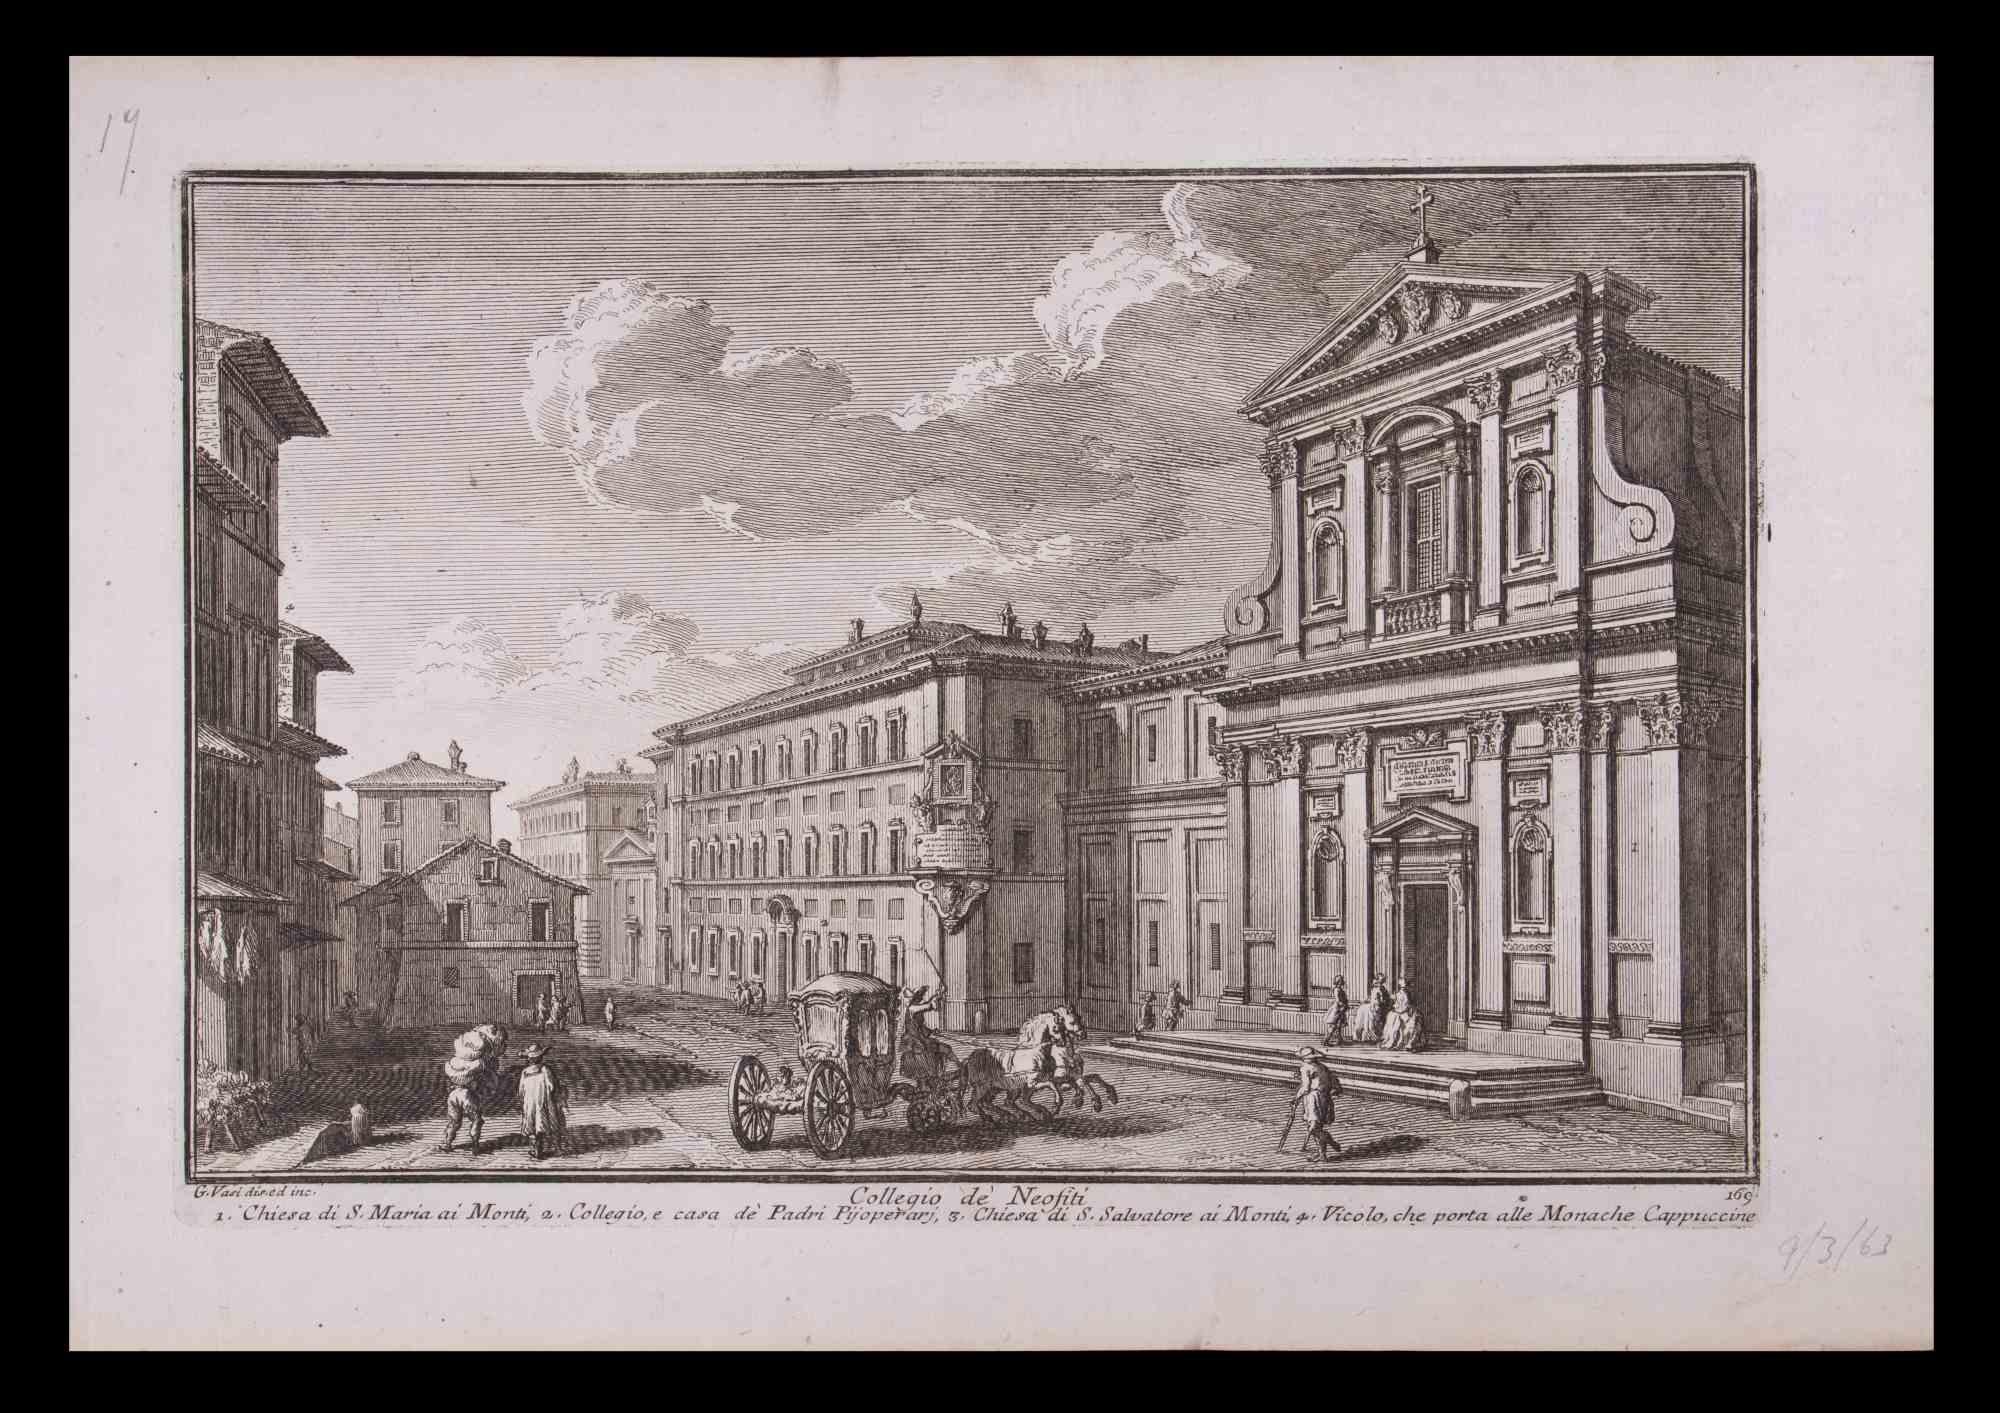 Collegio De Neofiti is an original black and white etching of the Late 18th century realized by Giuseppe Vasi.

Signed and titled on plate lower margin.

Good conditions and aged margins with some foxing.

Giuseppe Vasi  (Corleone,1710 - Rome, 1782)